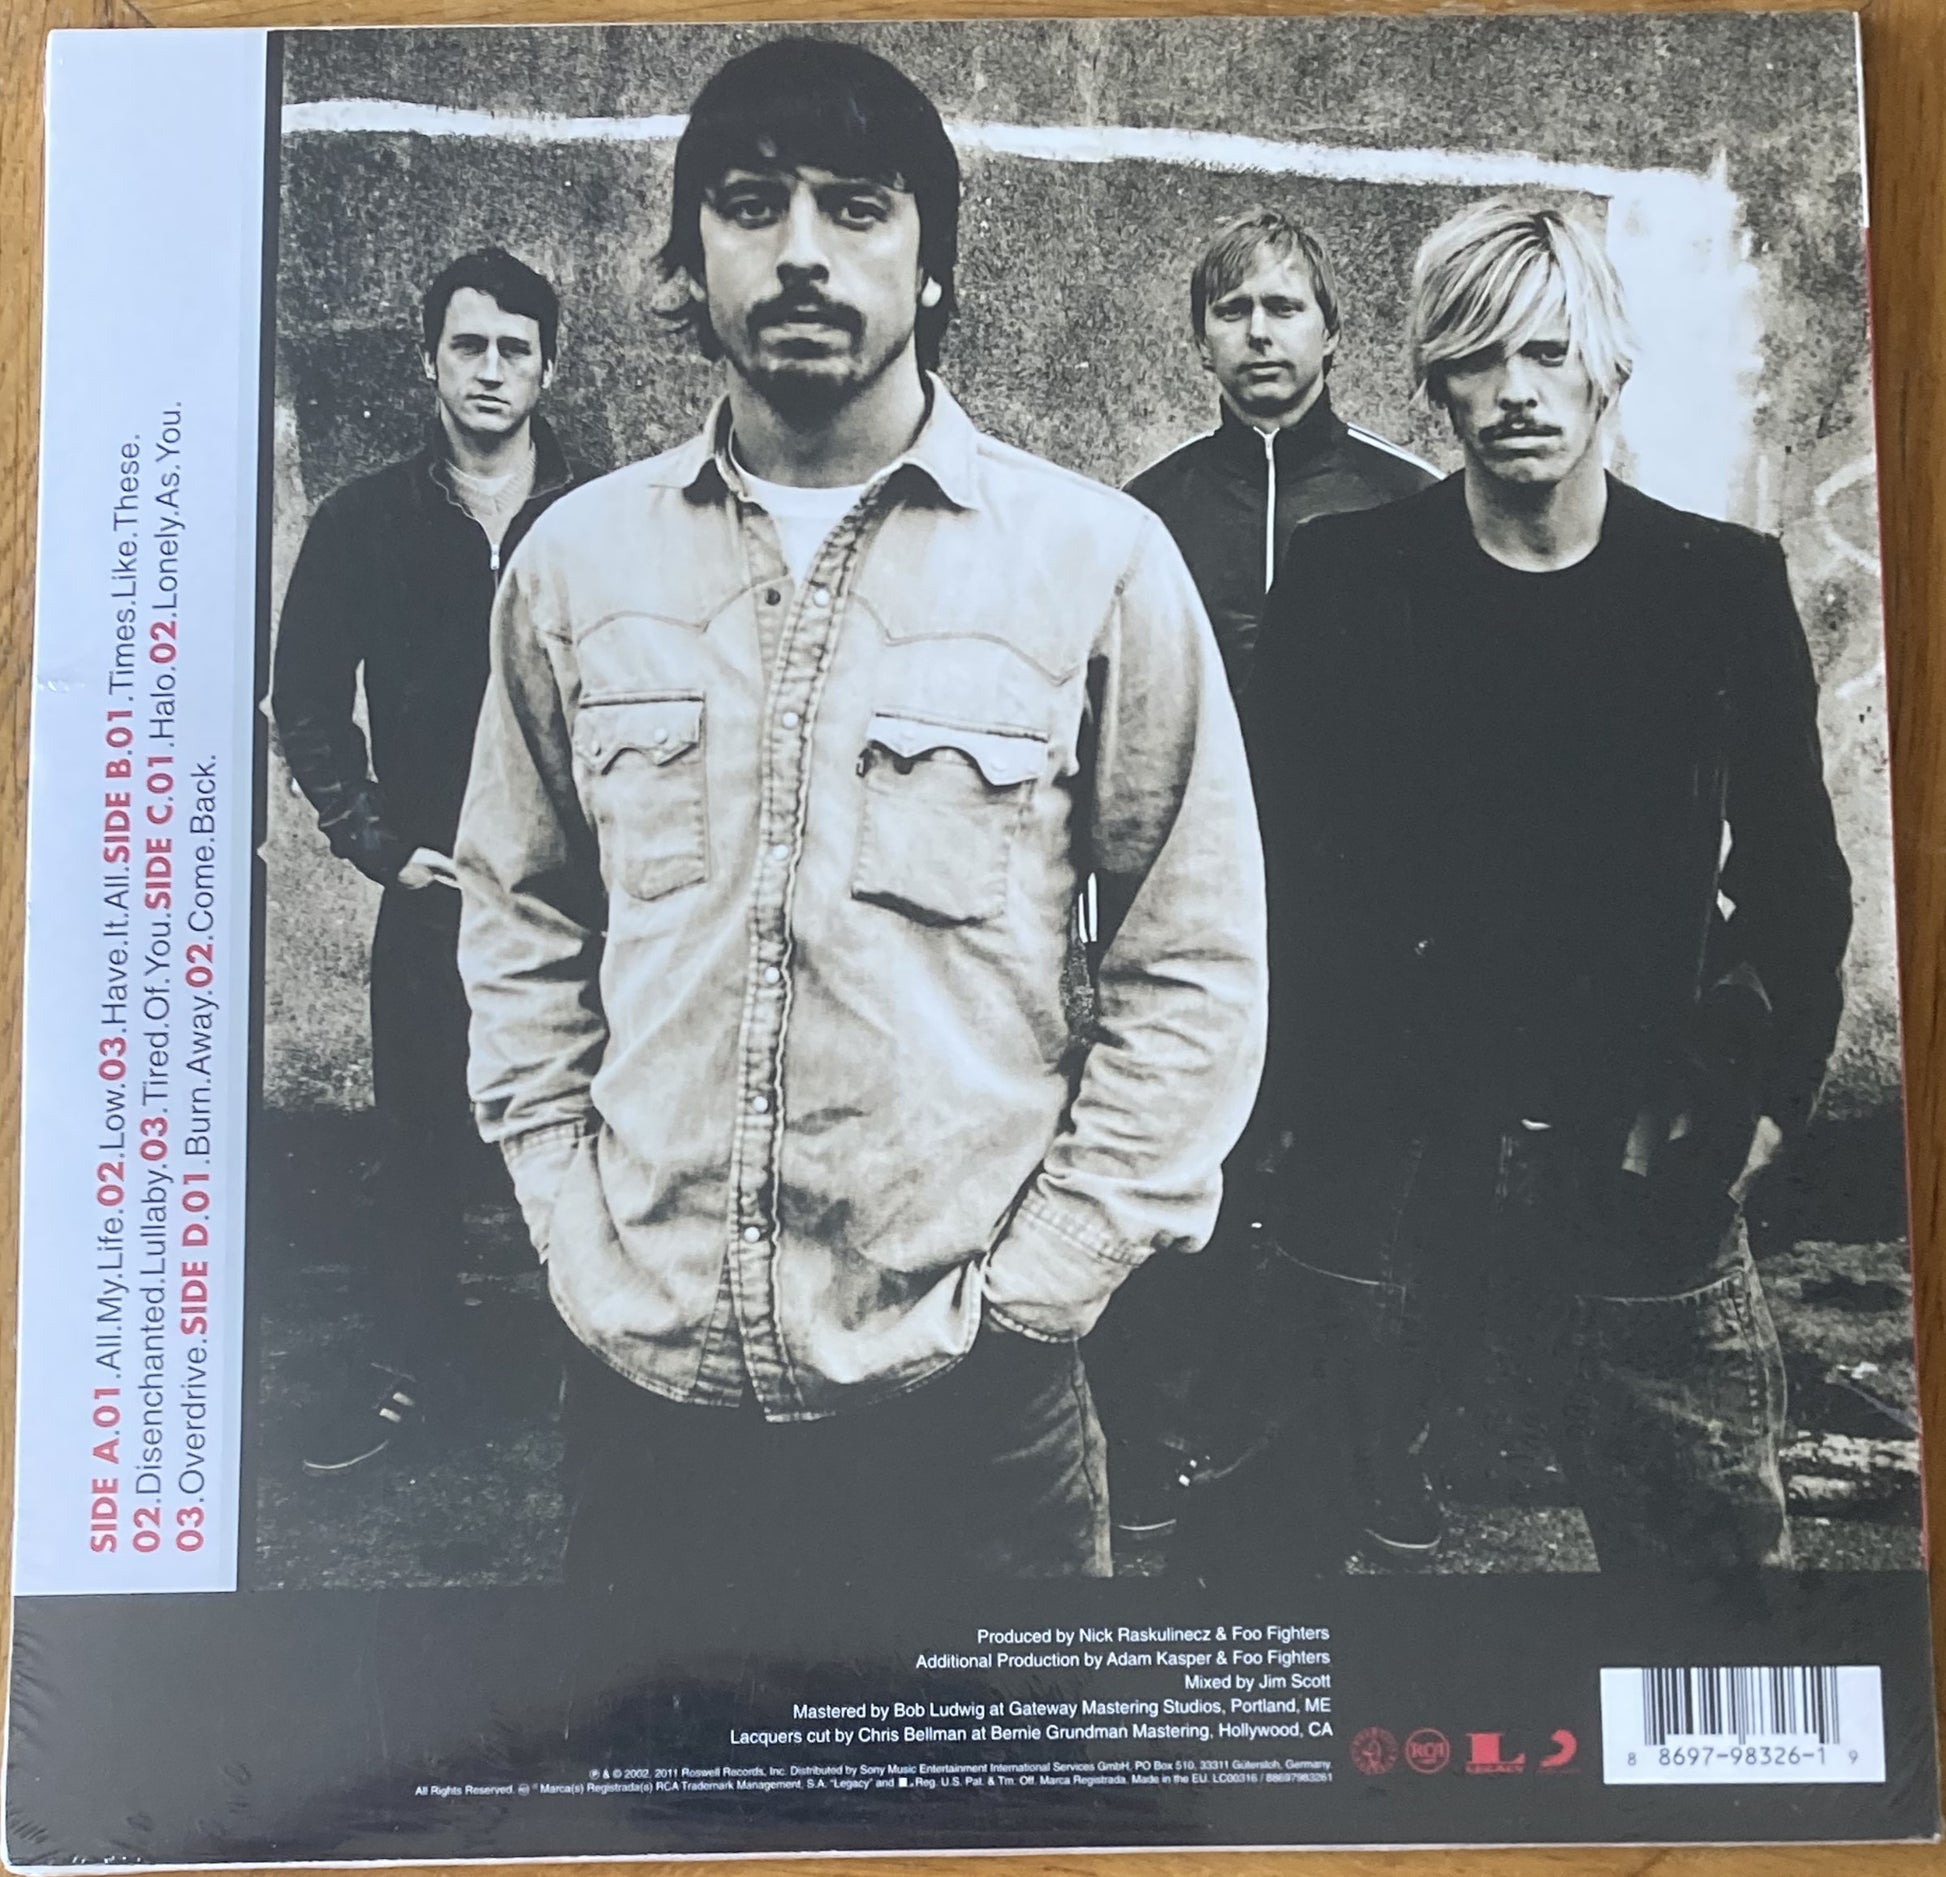 The back of 'Foo Fighters - One by One' on vinyl